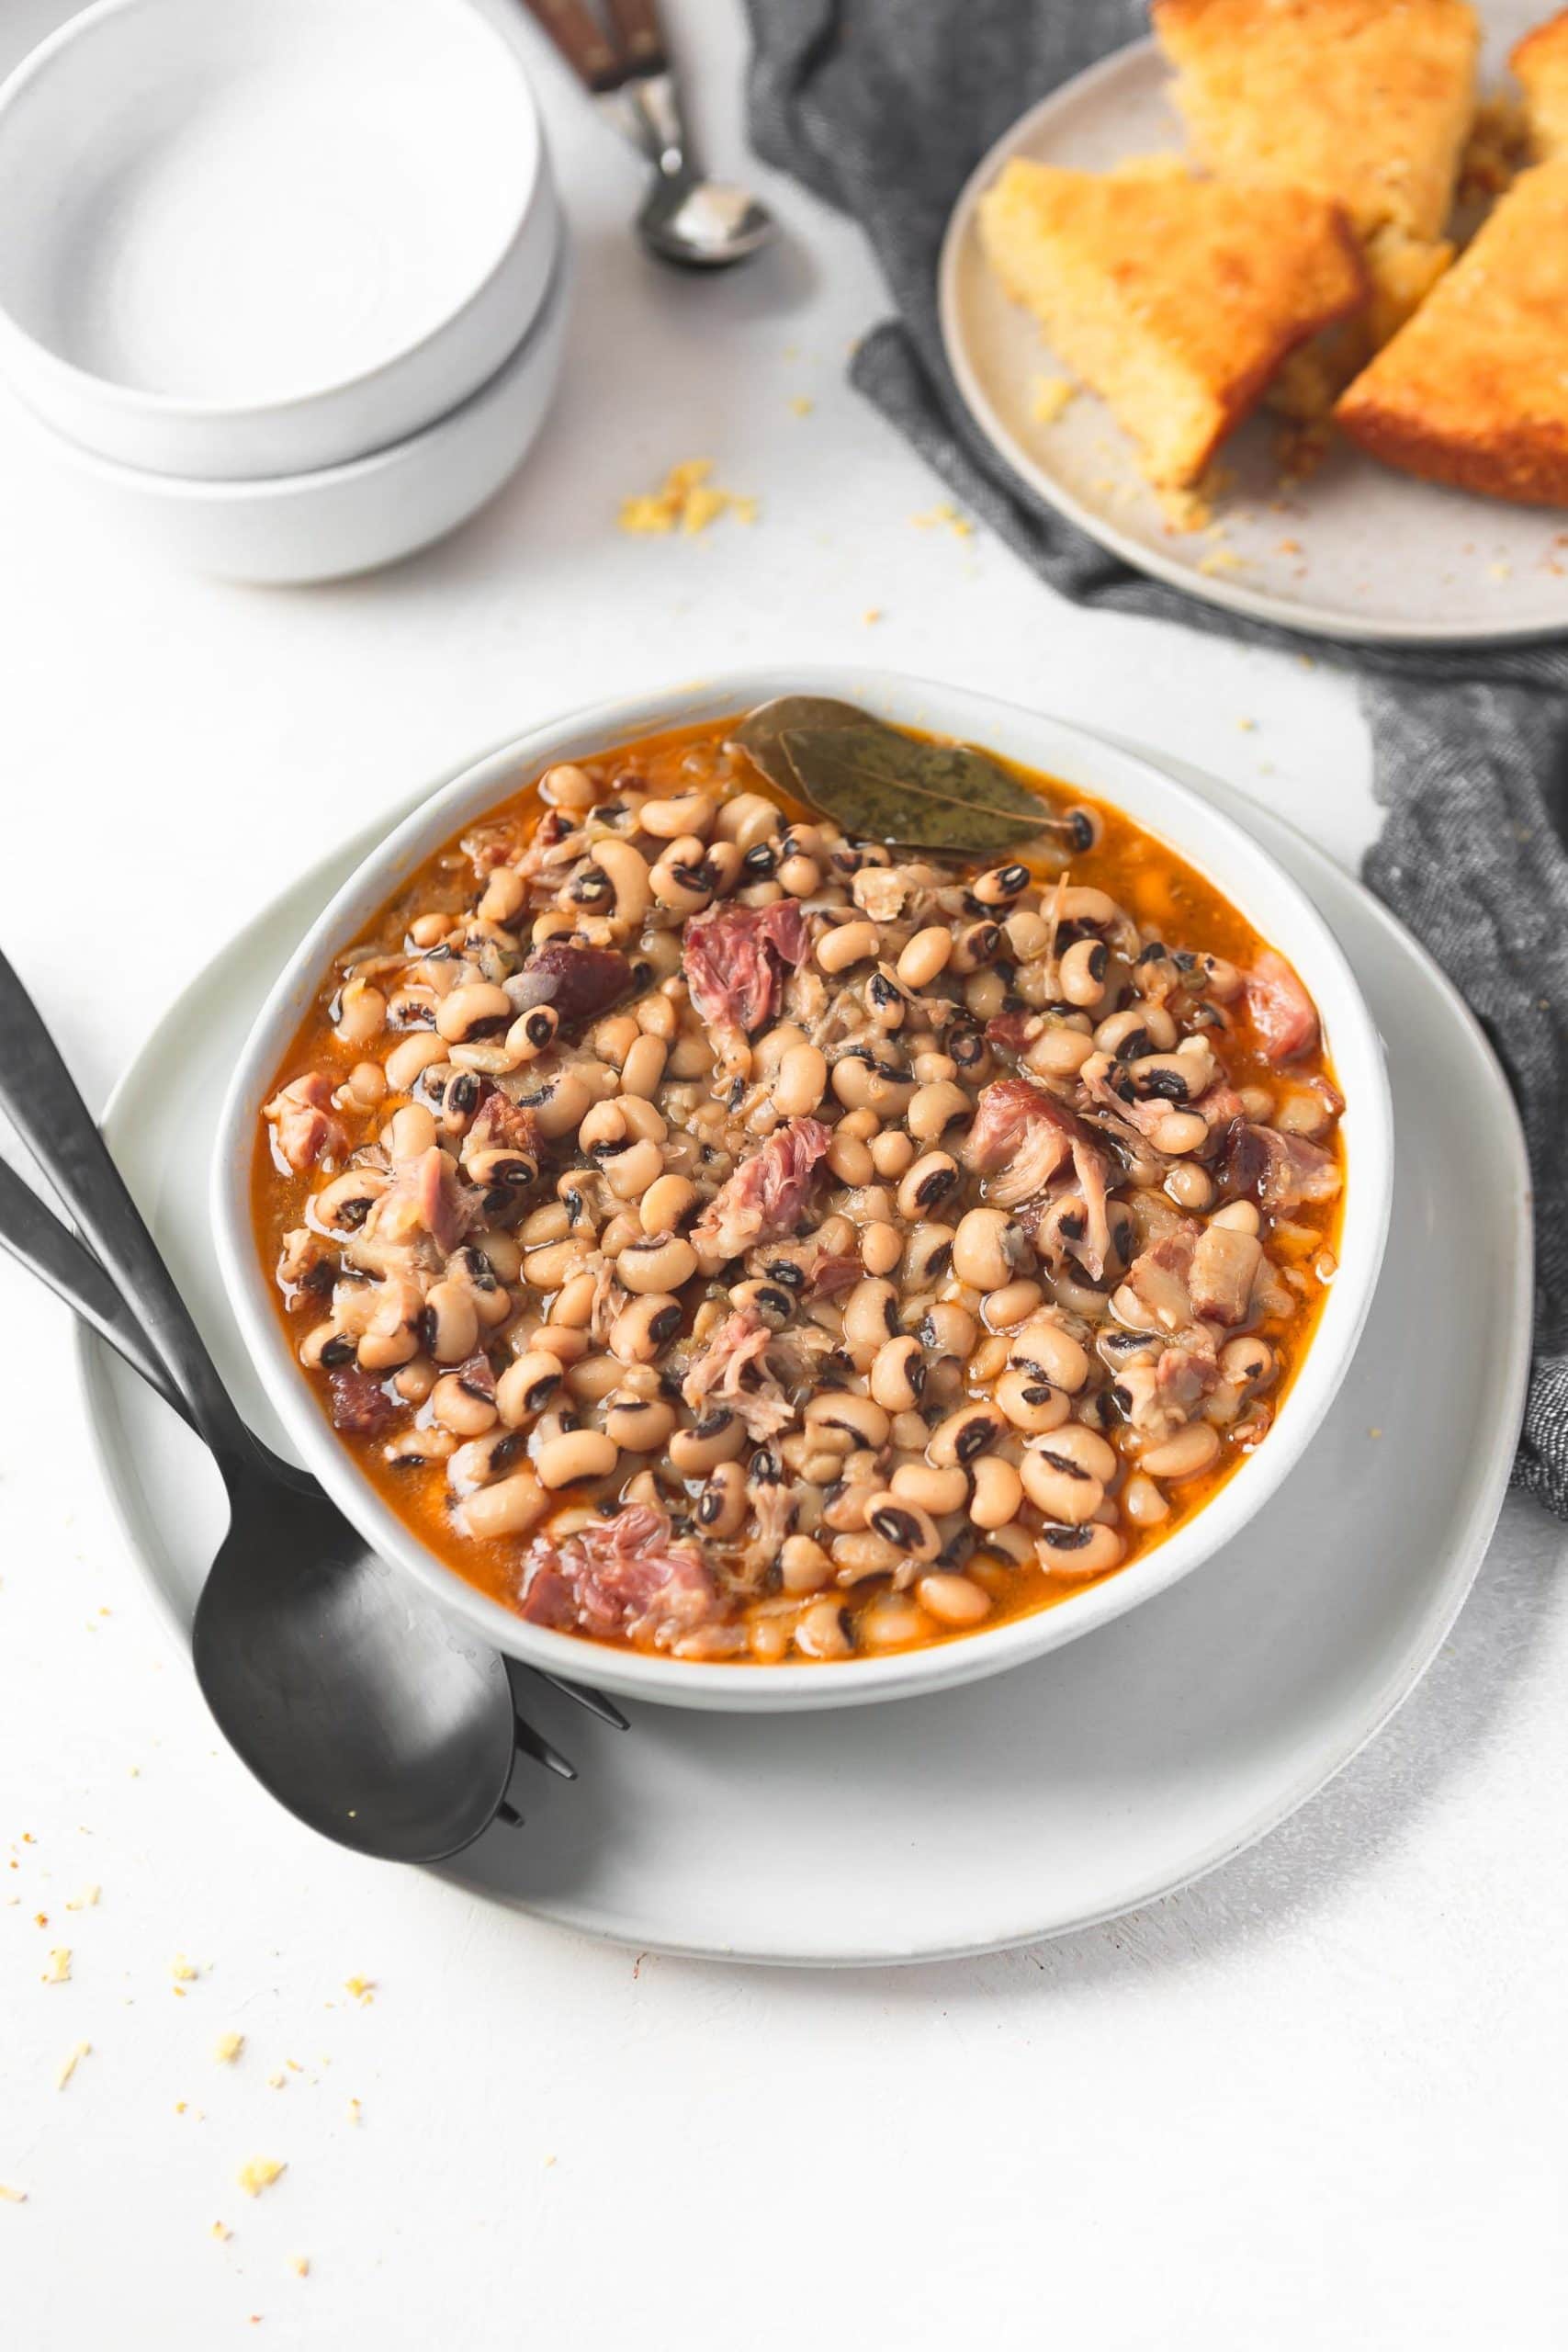 Black-Eyed Peas for New Years from Oh Sweet Basil